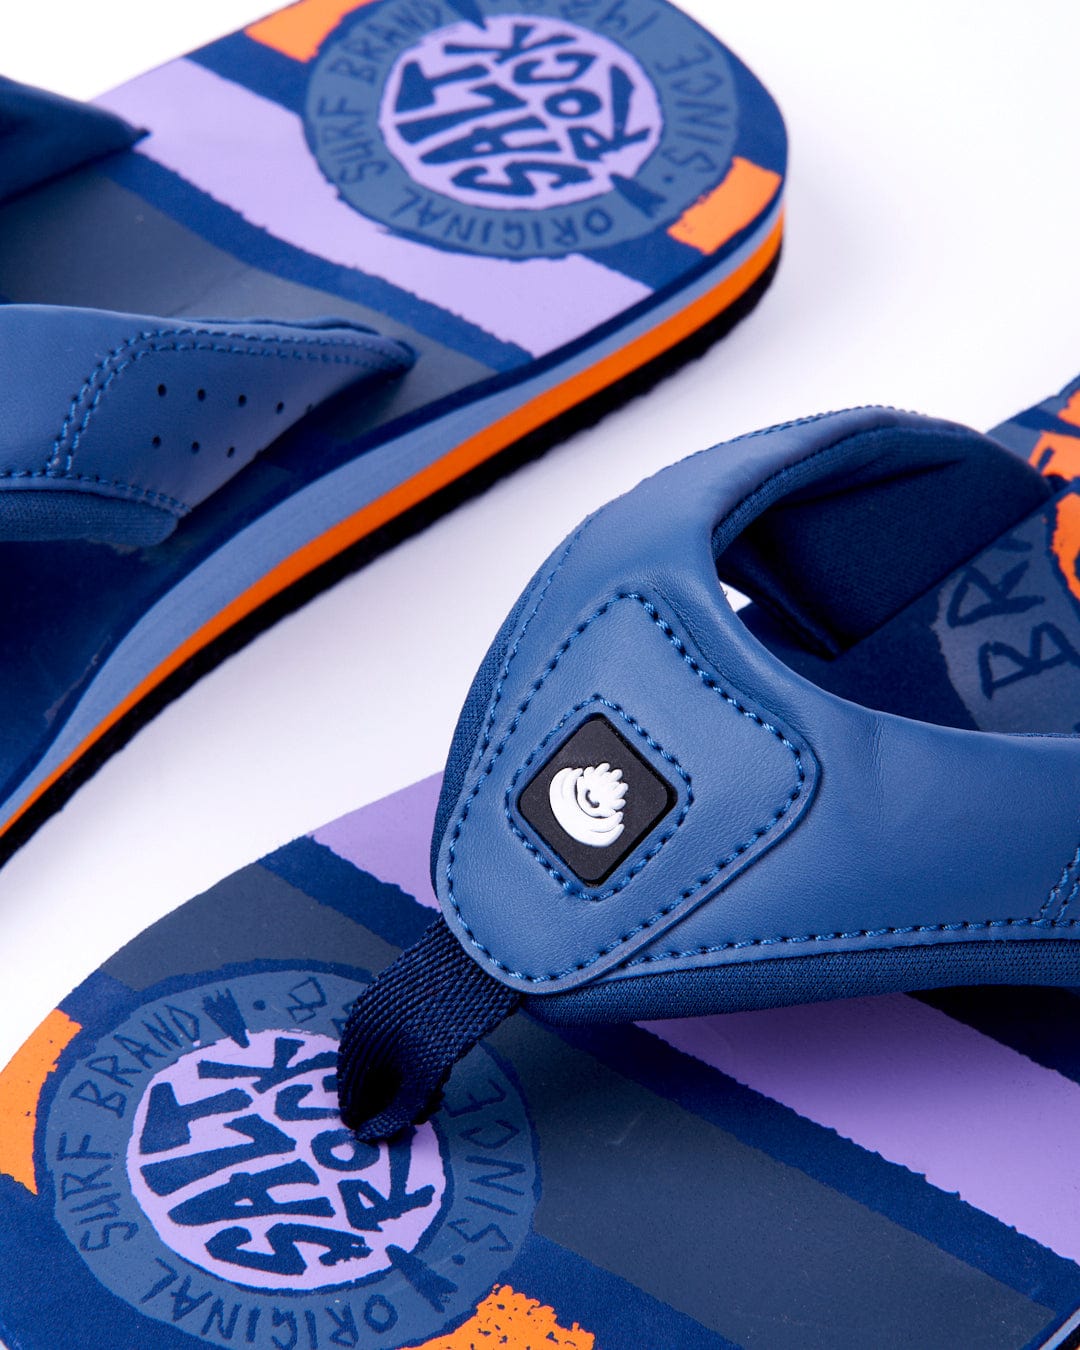 A close-up of blue flip-flops with orange accents and Saltrock branding on the insoles.